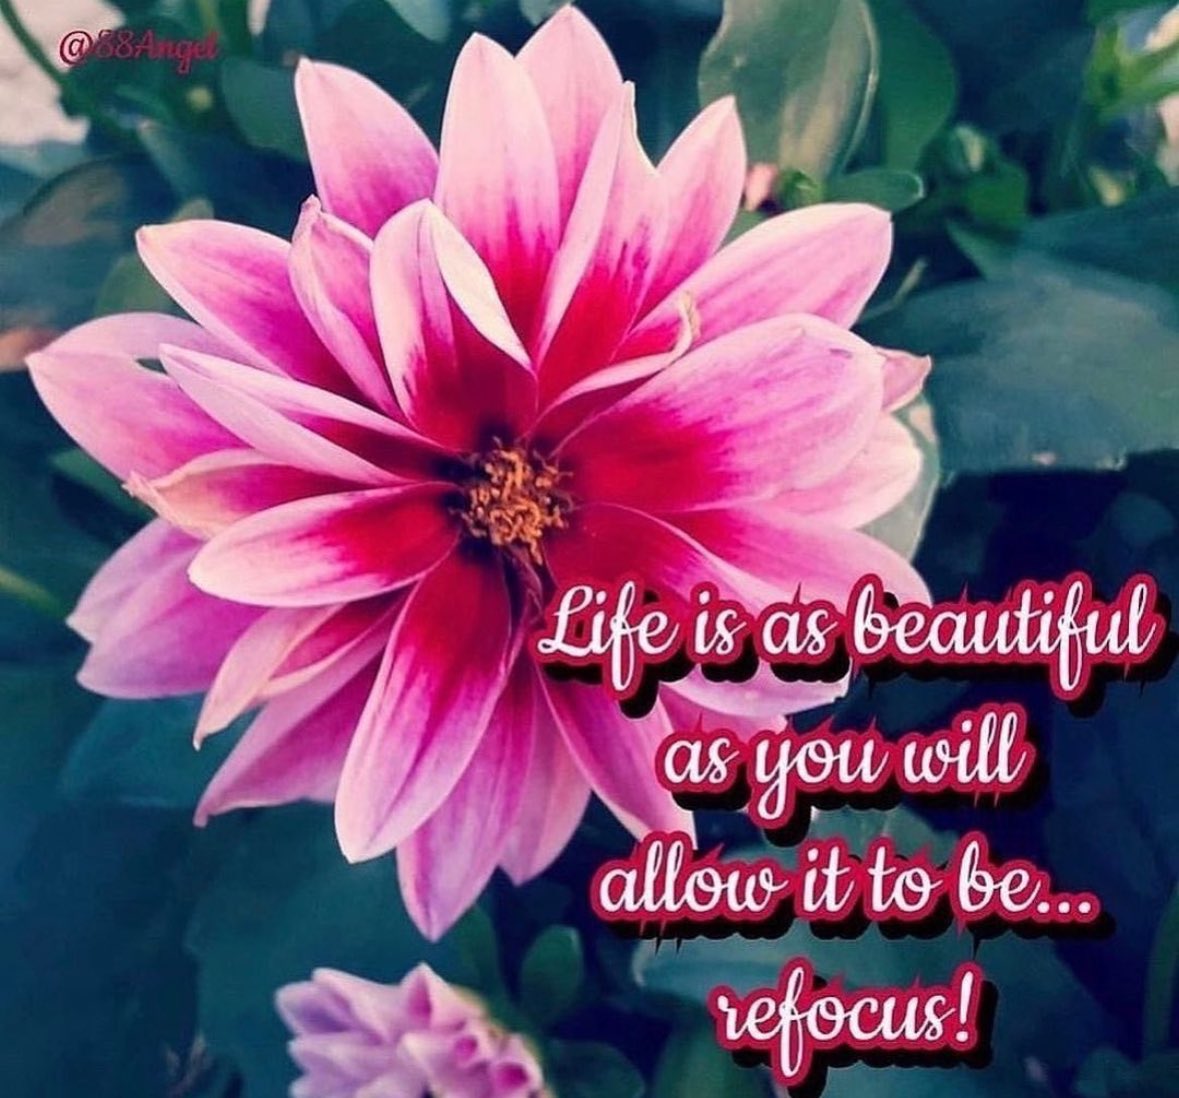 Life is as beautiful as you will allow it to be... refocus!  #fridaymorning #fridaydaymotivation #FridayFeeIing #fridaymood #friday #motivation #quotes #quote #Inspiration #inspirationalquotes #inspirational